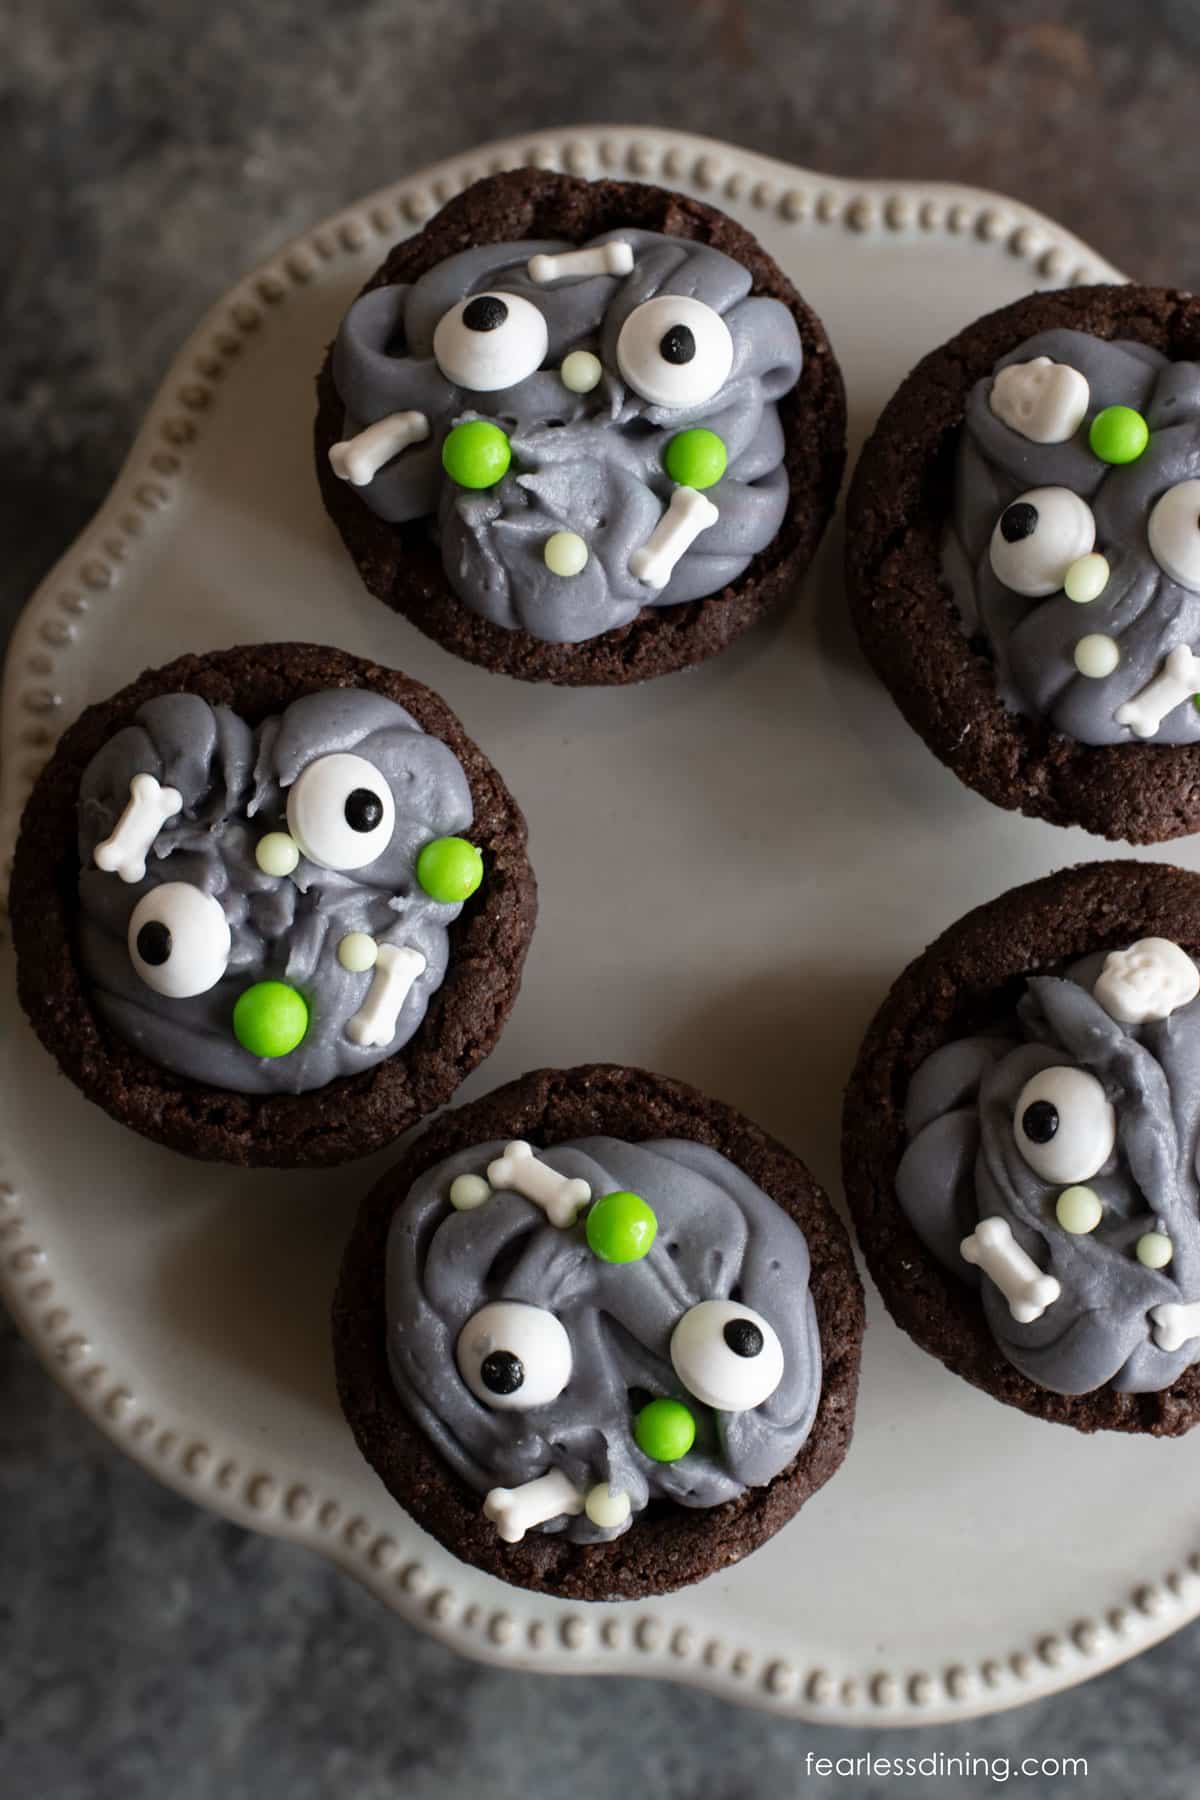 A small serving platter with chocolate cookie cups decorated like monsters.